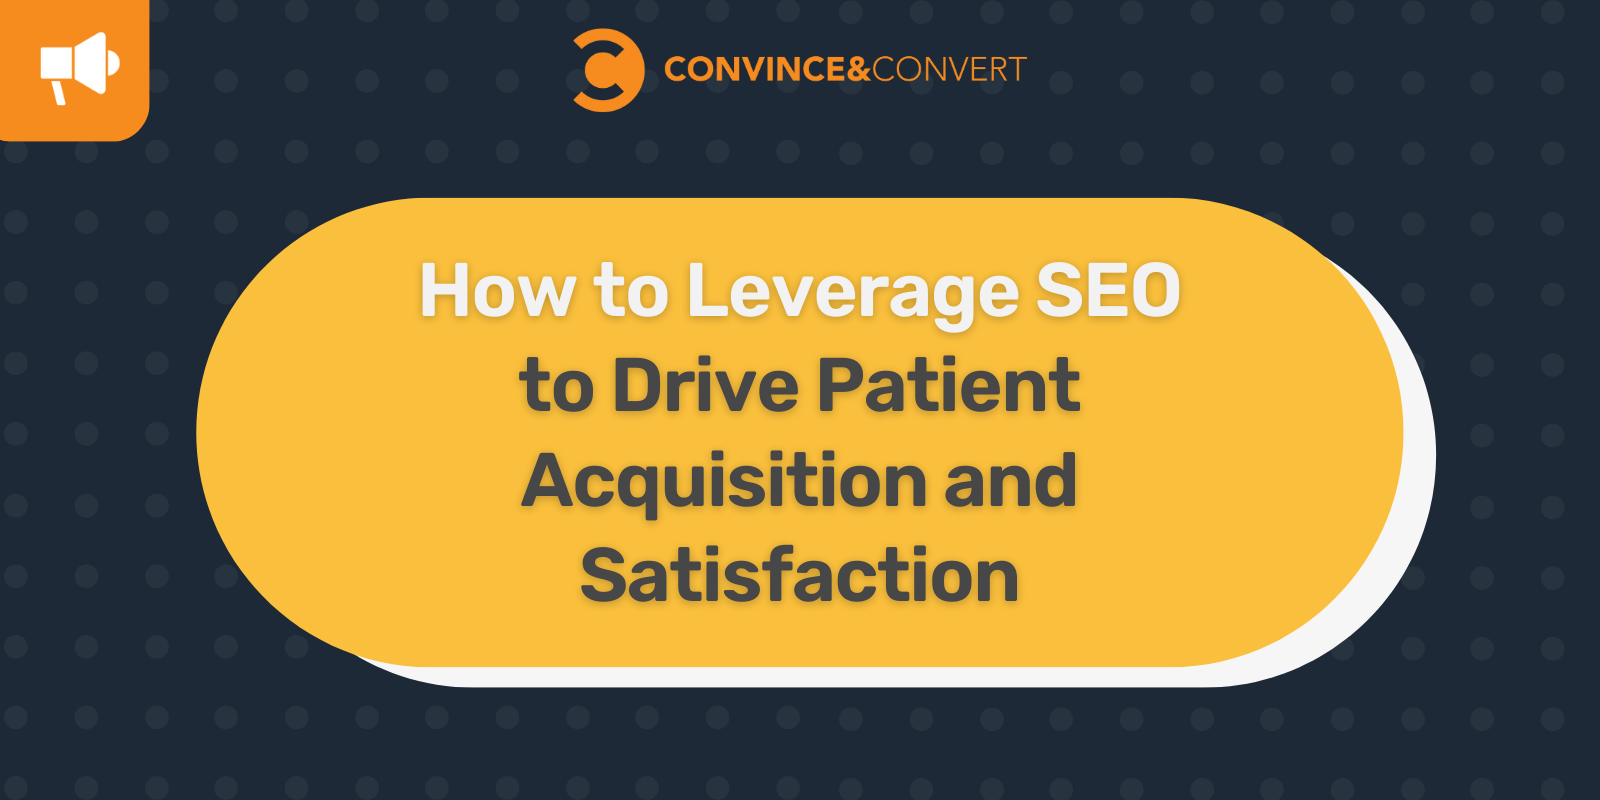 How to Leverage SEO to Drive Patient Acquisition and Satisfaction